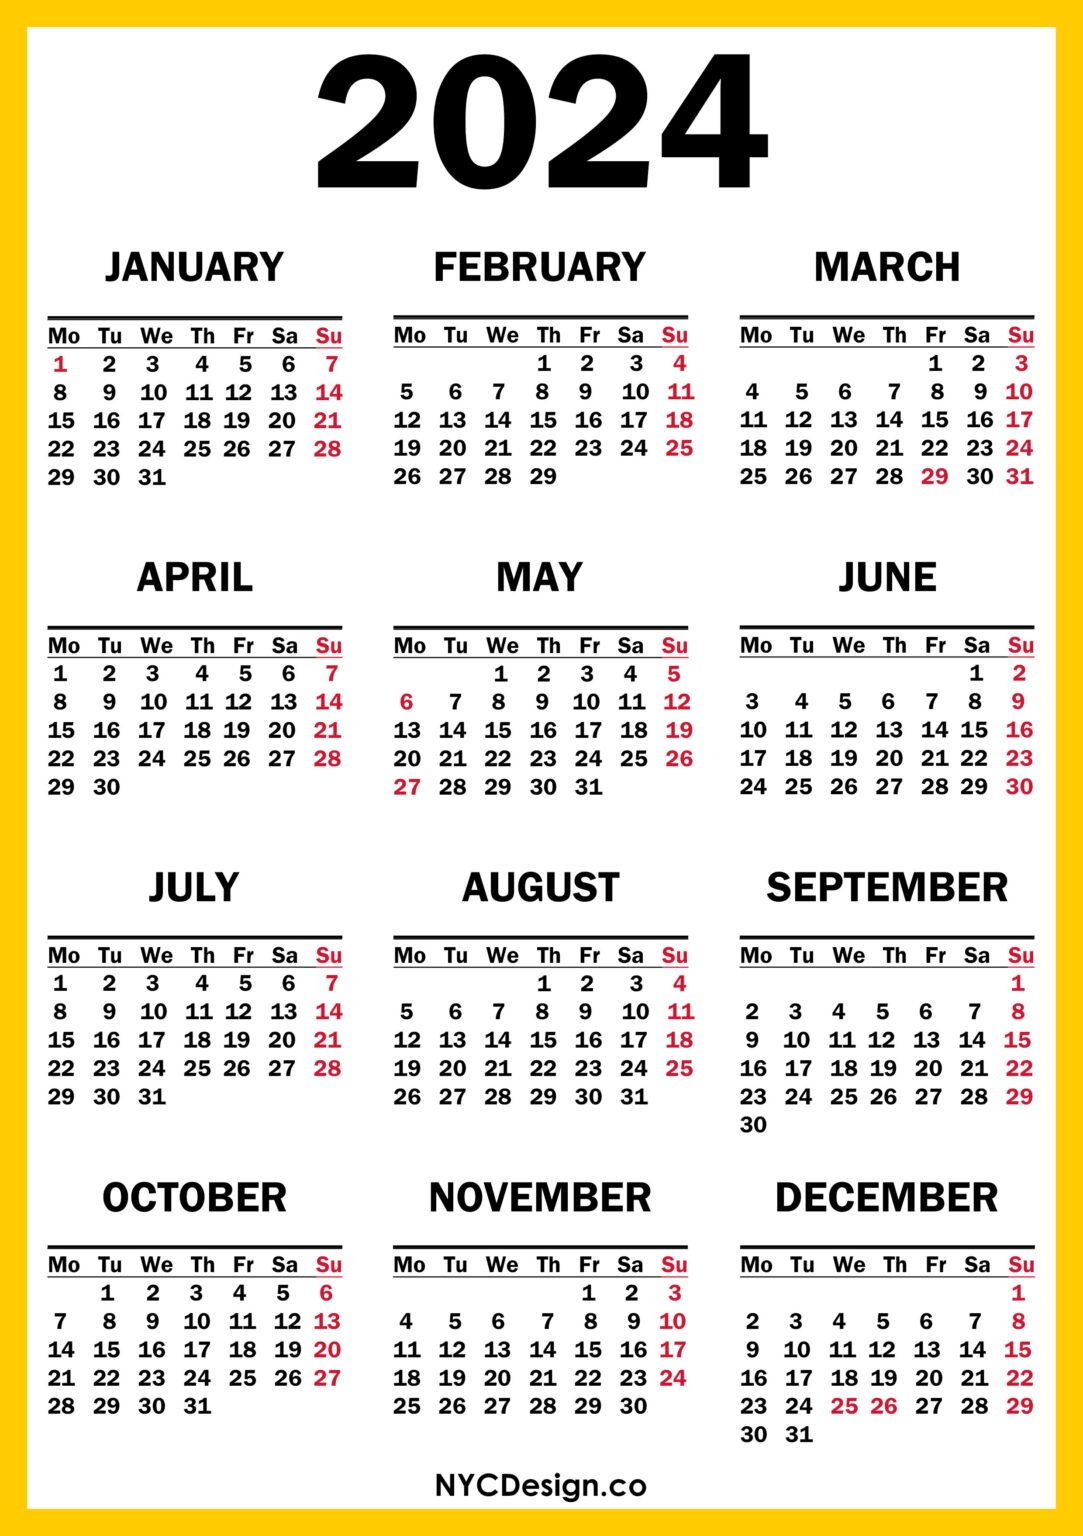 2024 Calendar Templates And Images Printable 2024 Calendar With Us - Free Printable 2024 Monthly Calendar With Us Holidays